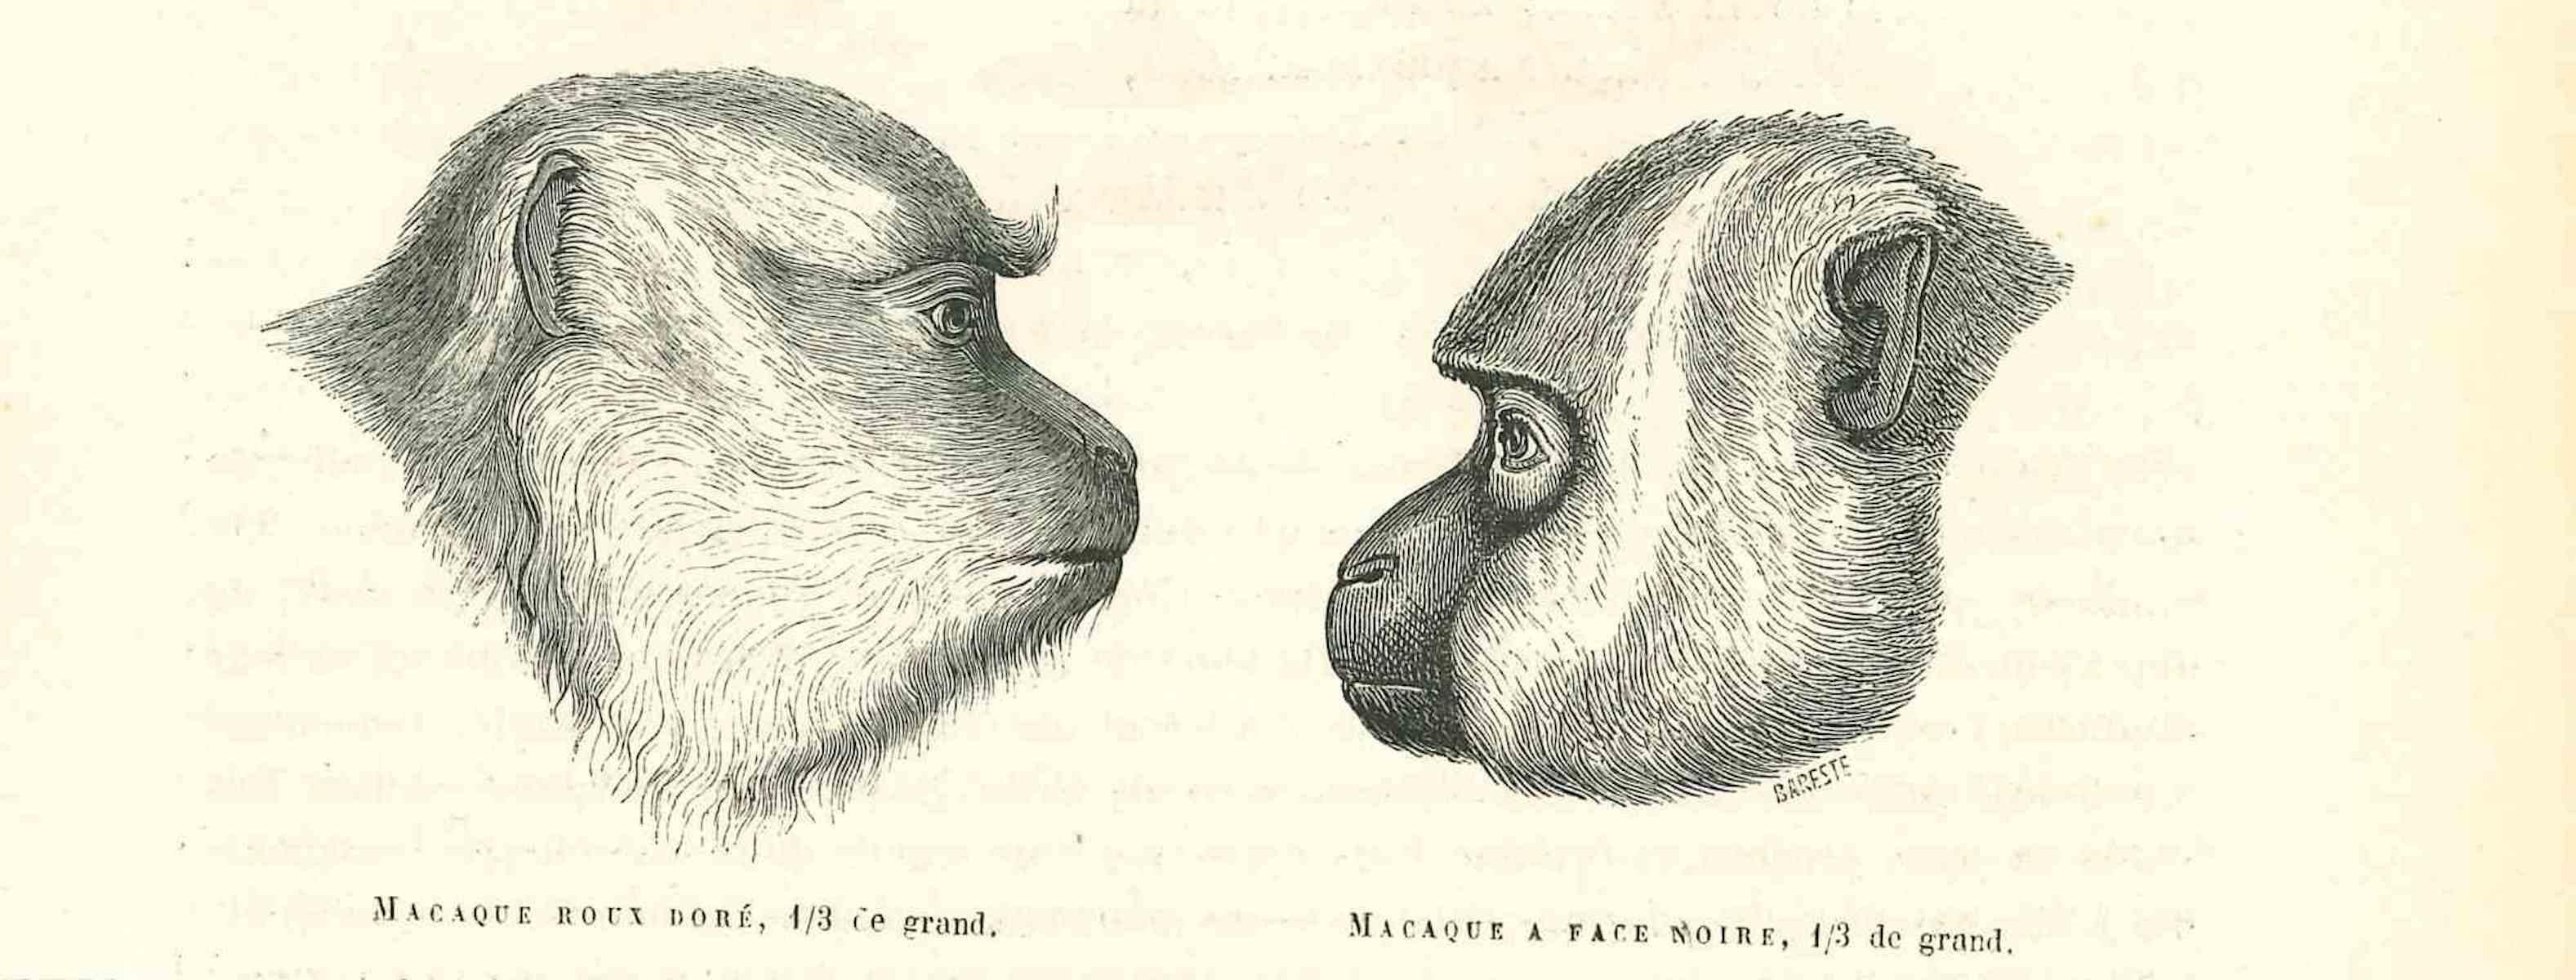 The Monkeys Look - Original Lithograph by Paul Gervais - 1854